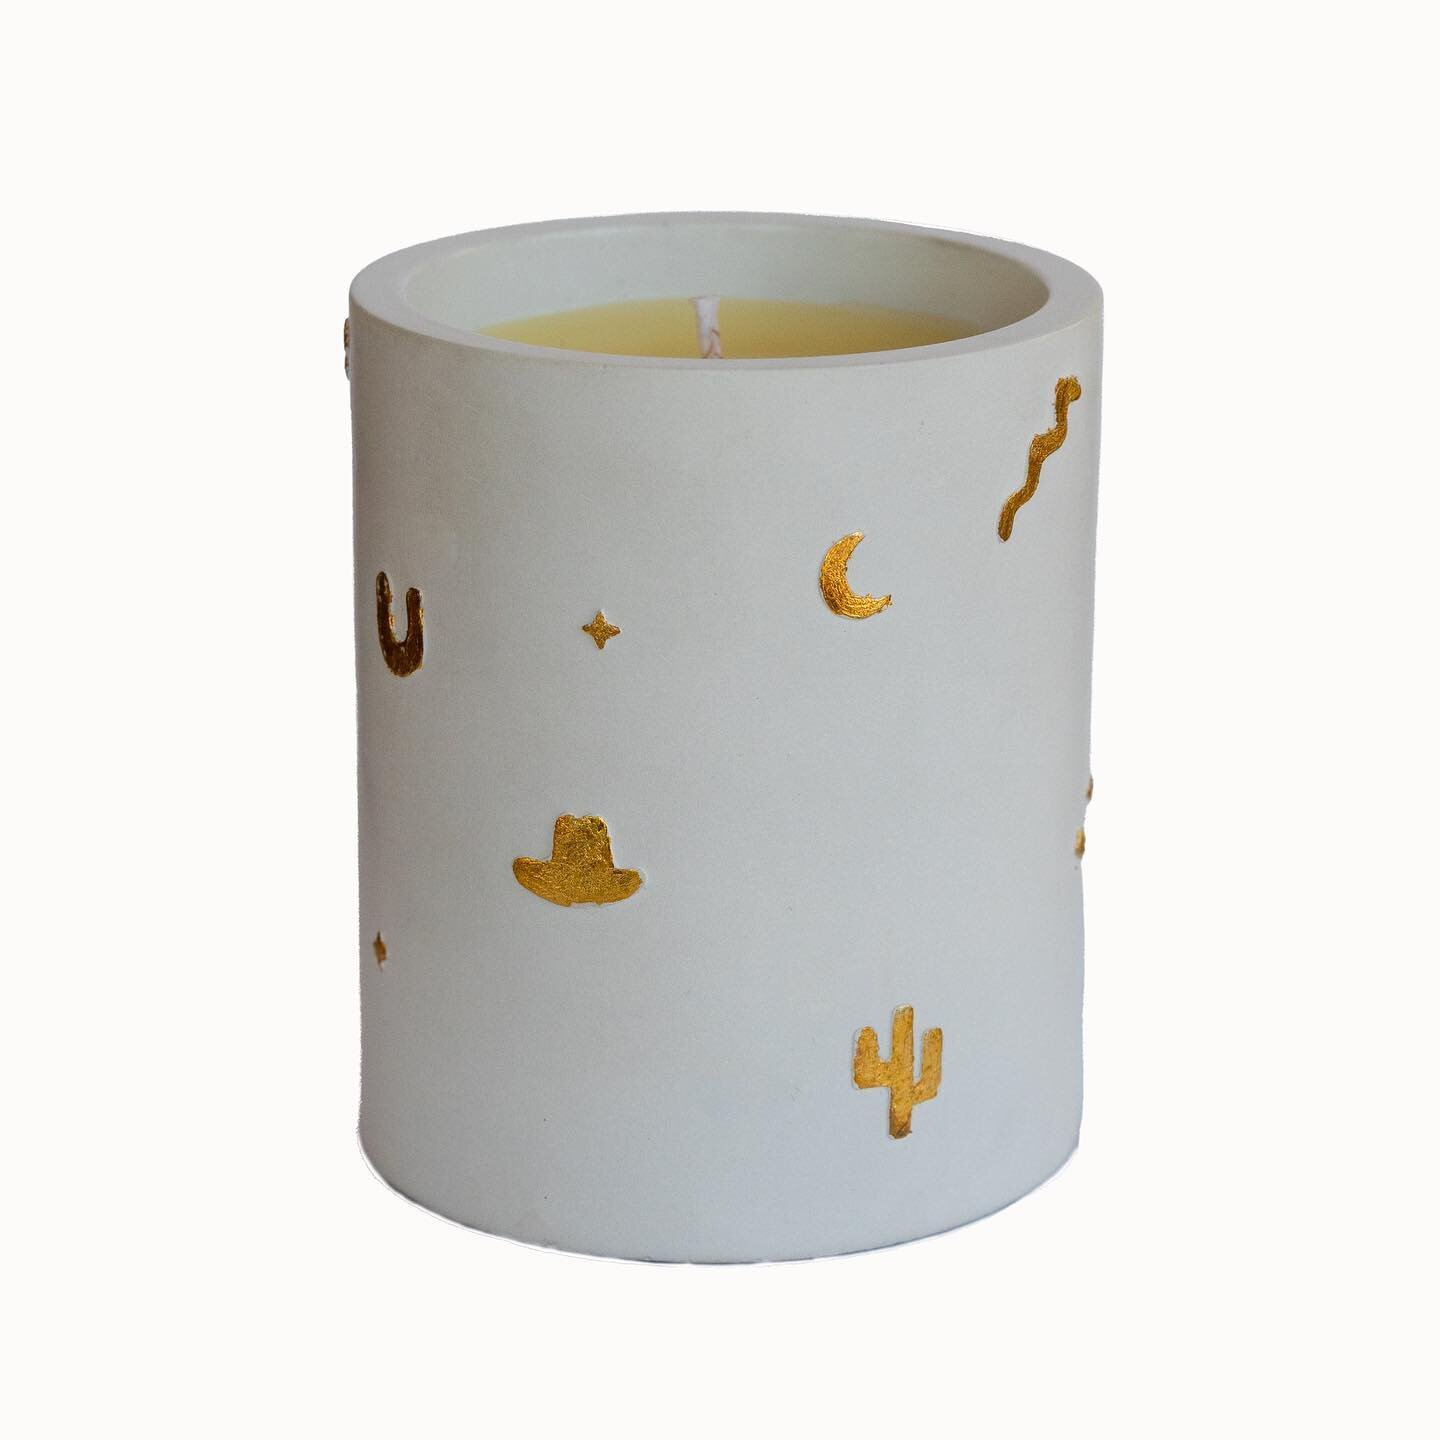 New candle jar available for pre order. It's called Cowgirl Light Vessel and it's the coolest stone jar, filled with the purest bees wax and 100% natural orange blossom oil for a blissful light scent.

If you're a shop and would like to wholesale, dr